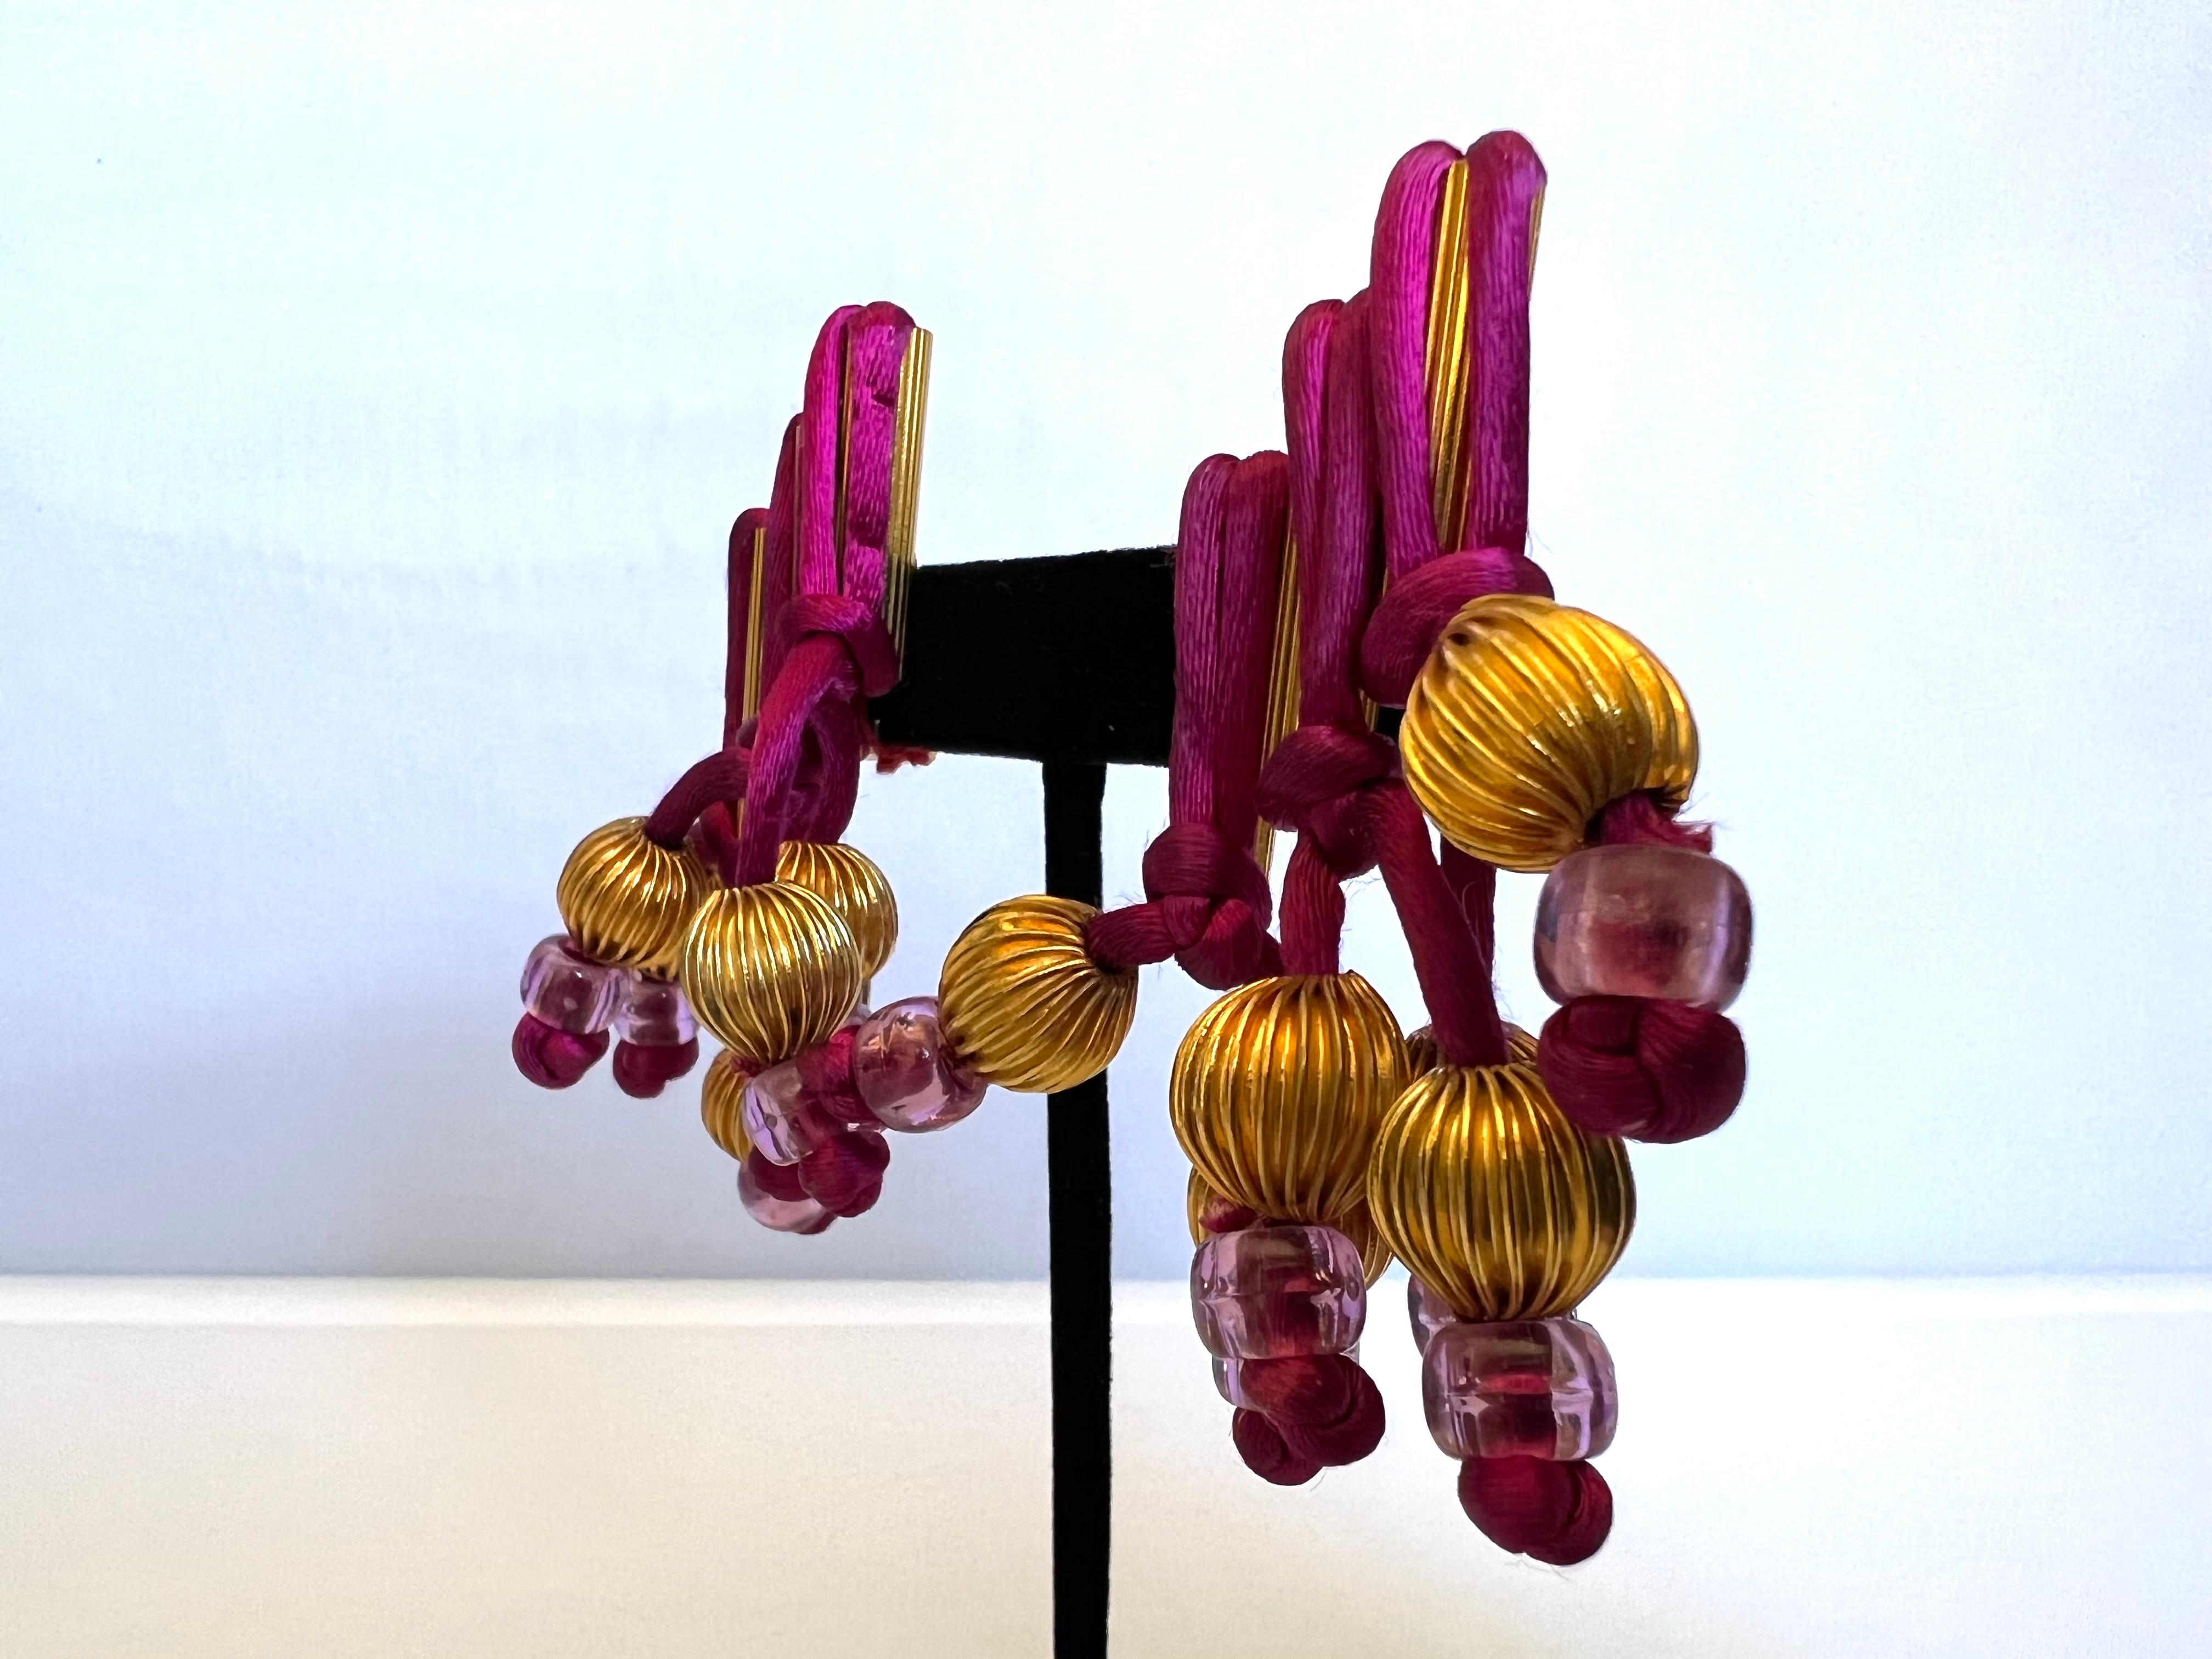 One-of-a-kind mixed material fringe statement clip-on earrings by William de Lillo/Robert F. Clark for Madame. Gres Haute Couture (spring/summer 1975). The museum-quality earrings feature mixed materials such as purple silk tassels, large gold-tone